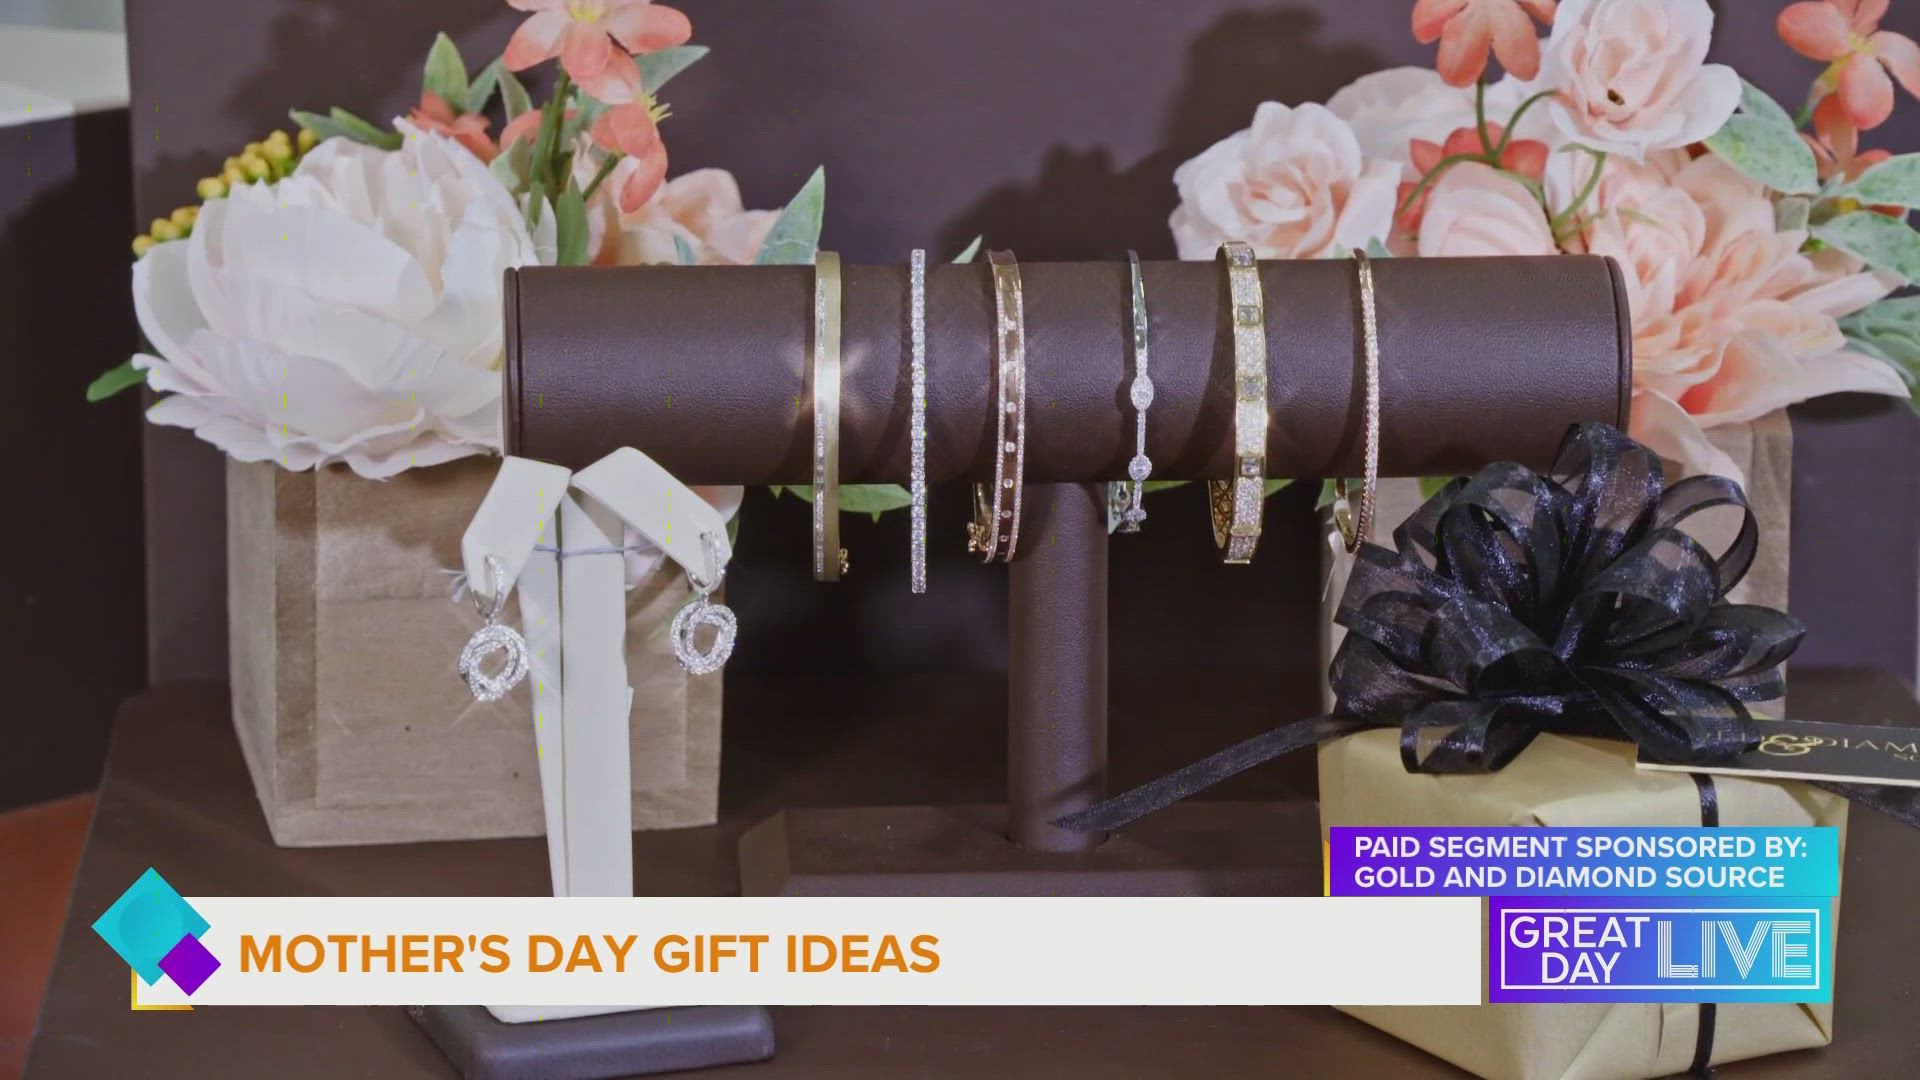 This story sponsored by: Gold & Diamond Source. Celebrating 40 years in business, they have a beautiful selection of gifts to get your mother on this Mother's Day.